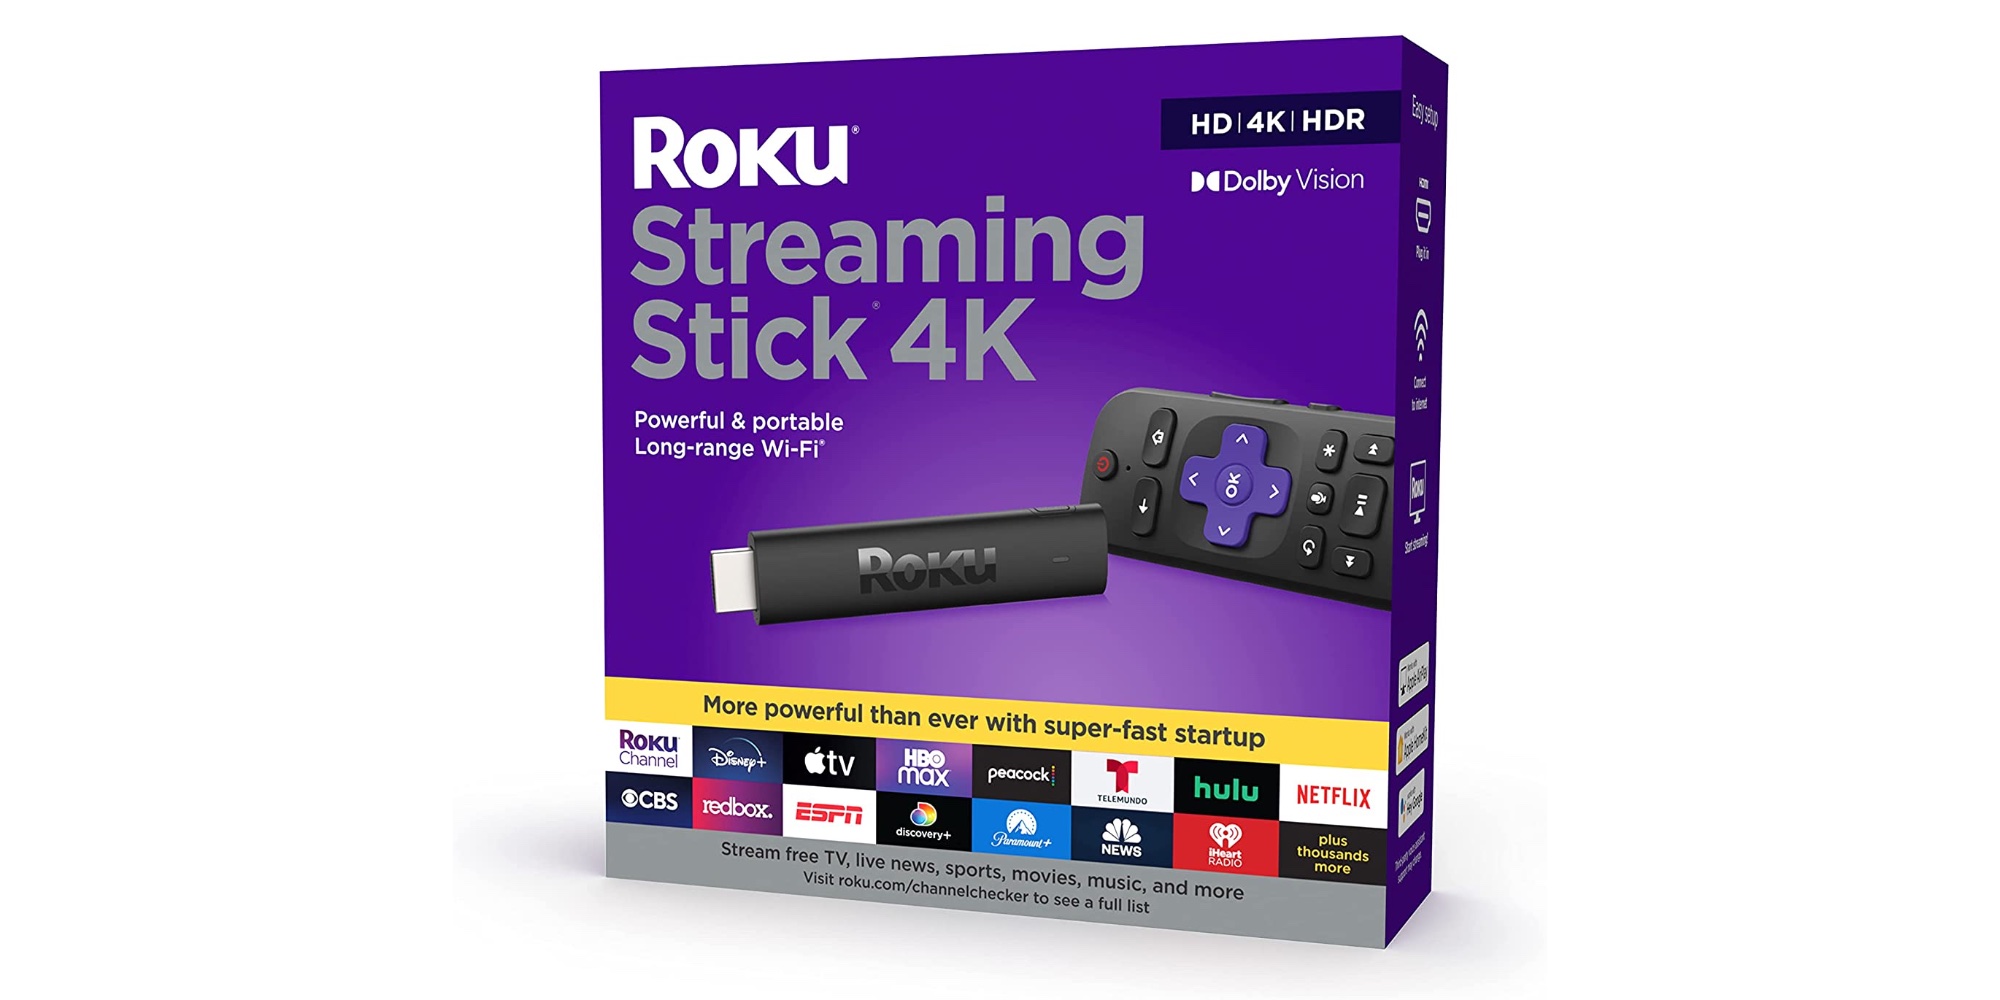 Rokus latest 4K Streaming Stick falls to new low $27 with fall Prime Day savings, more from $18